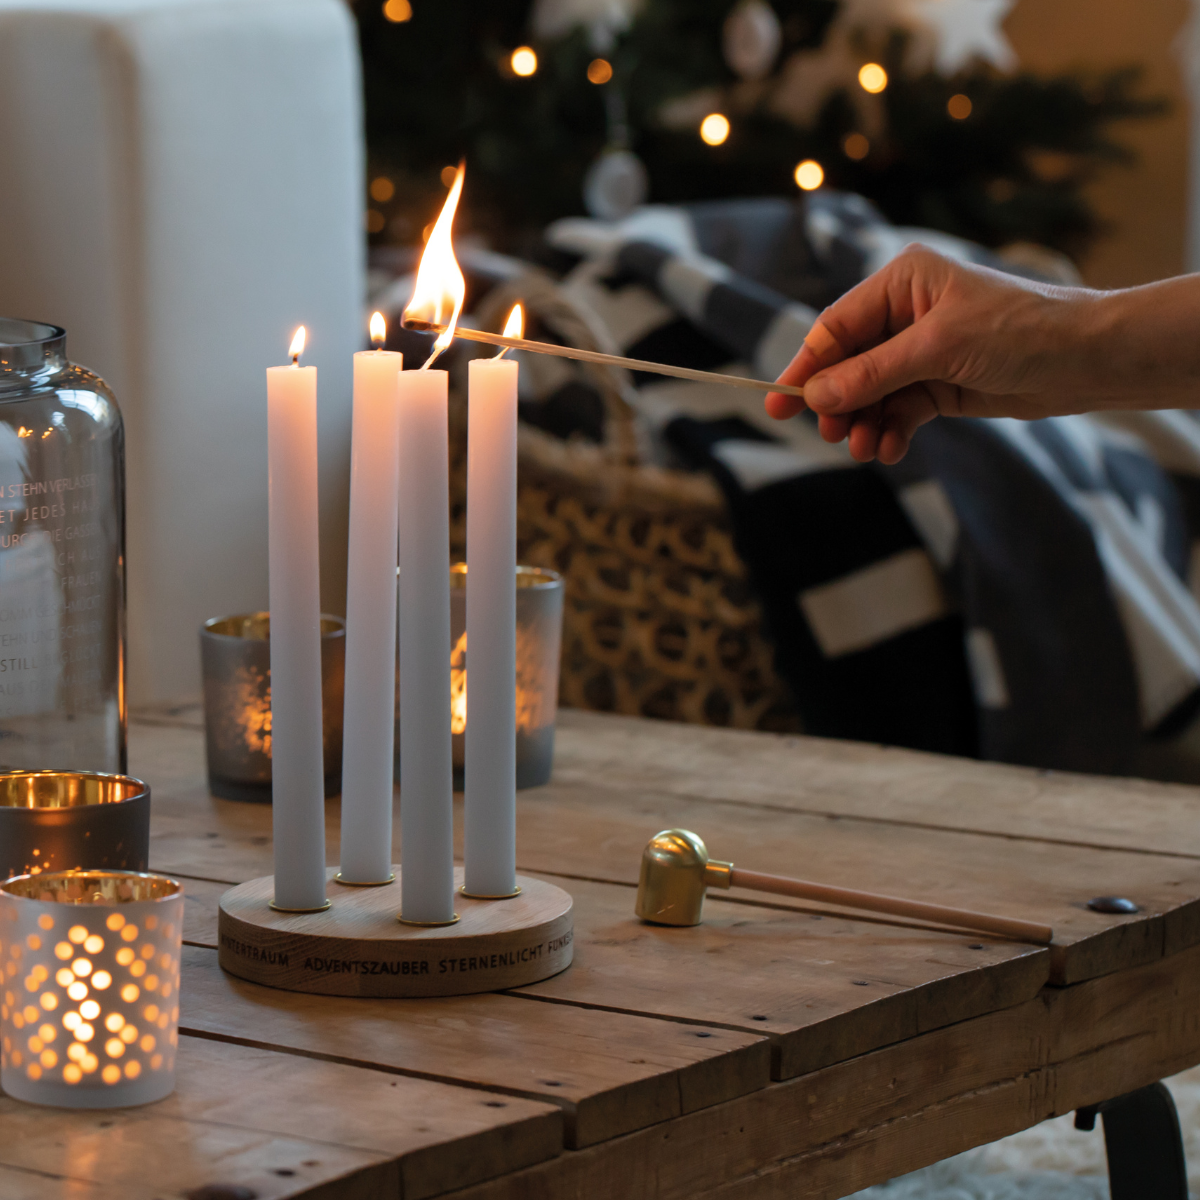 picture of hand holding a long match lighting candles in festive scene